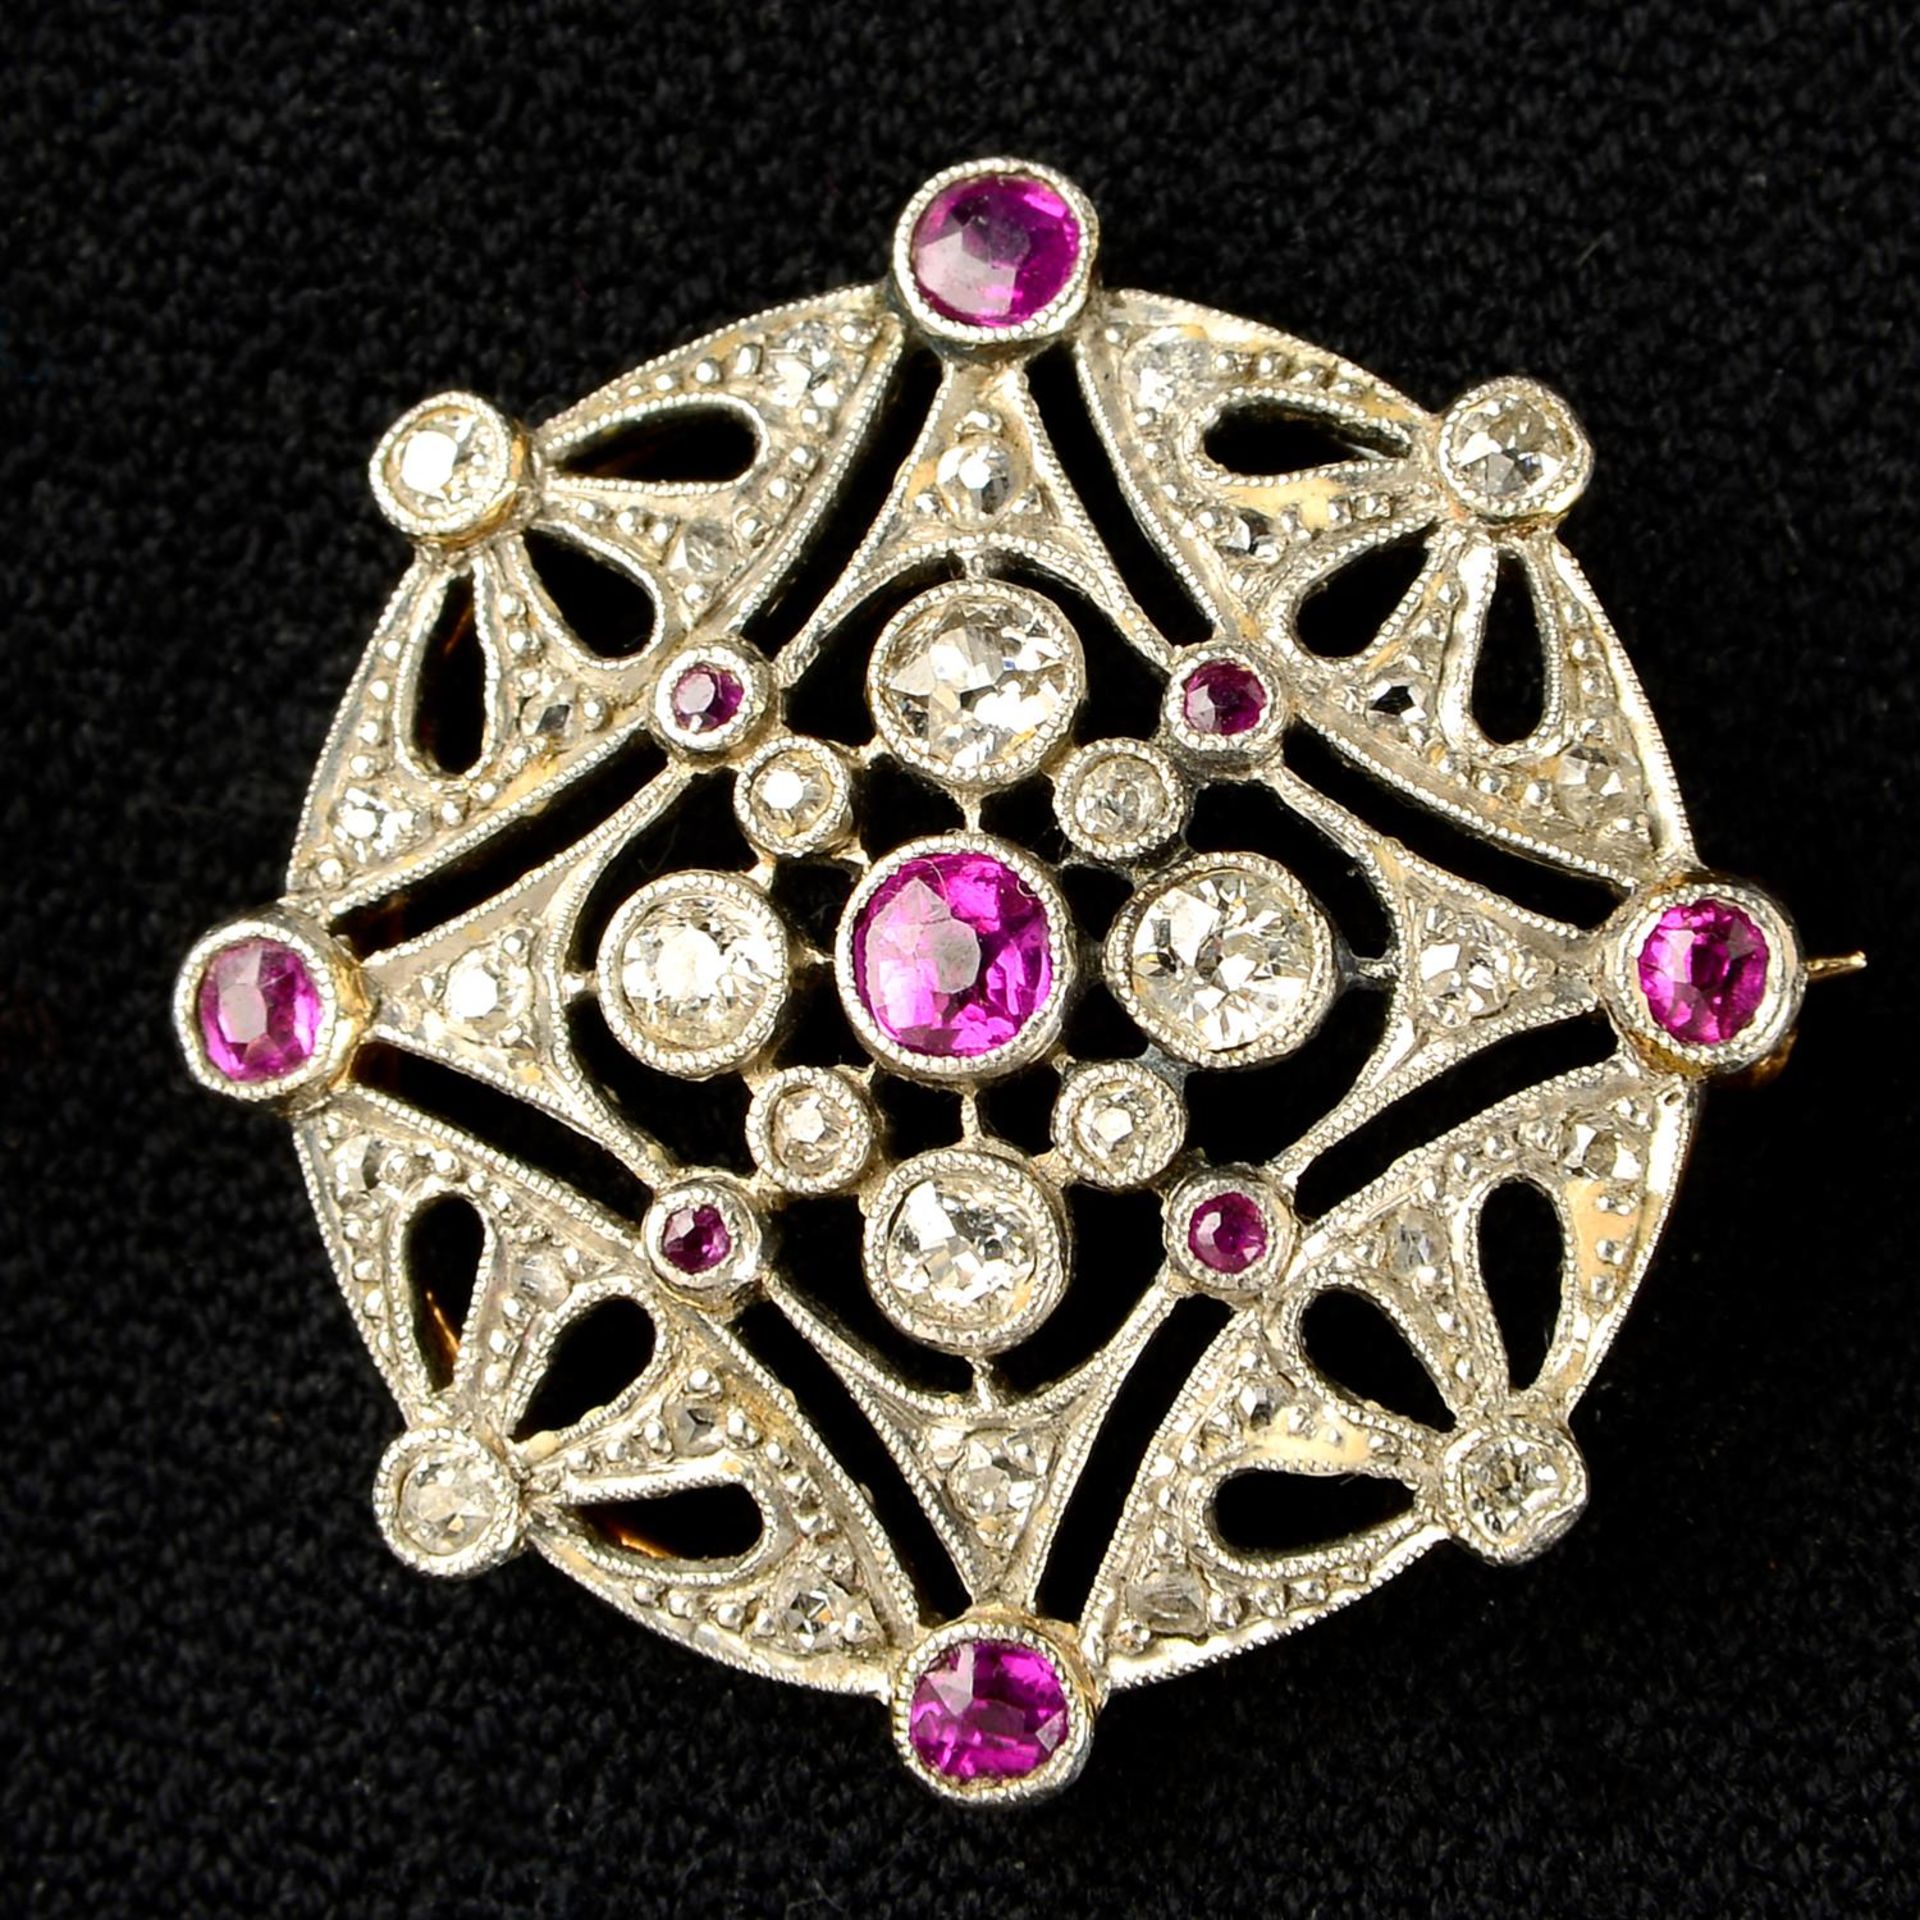 An Edwardian platinum and gold ruby, rose and old-cut diamond openwork brooch.